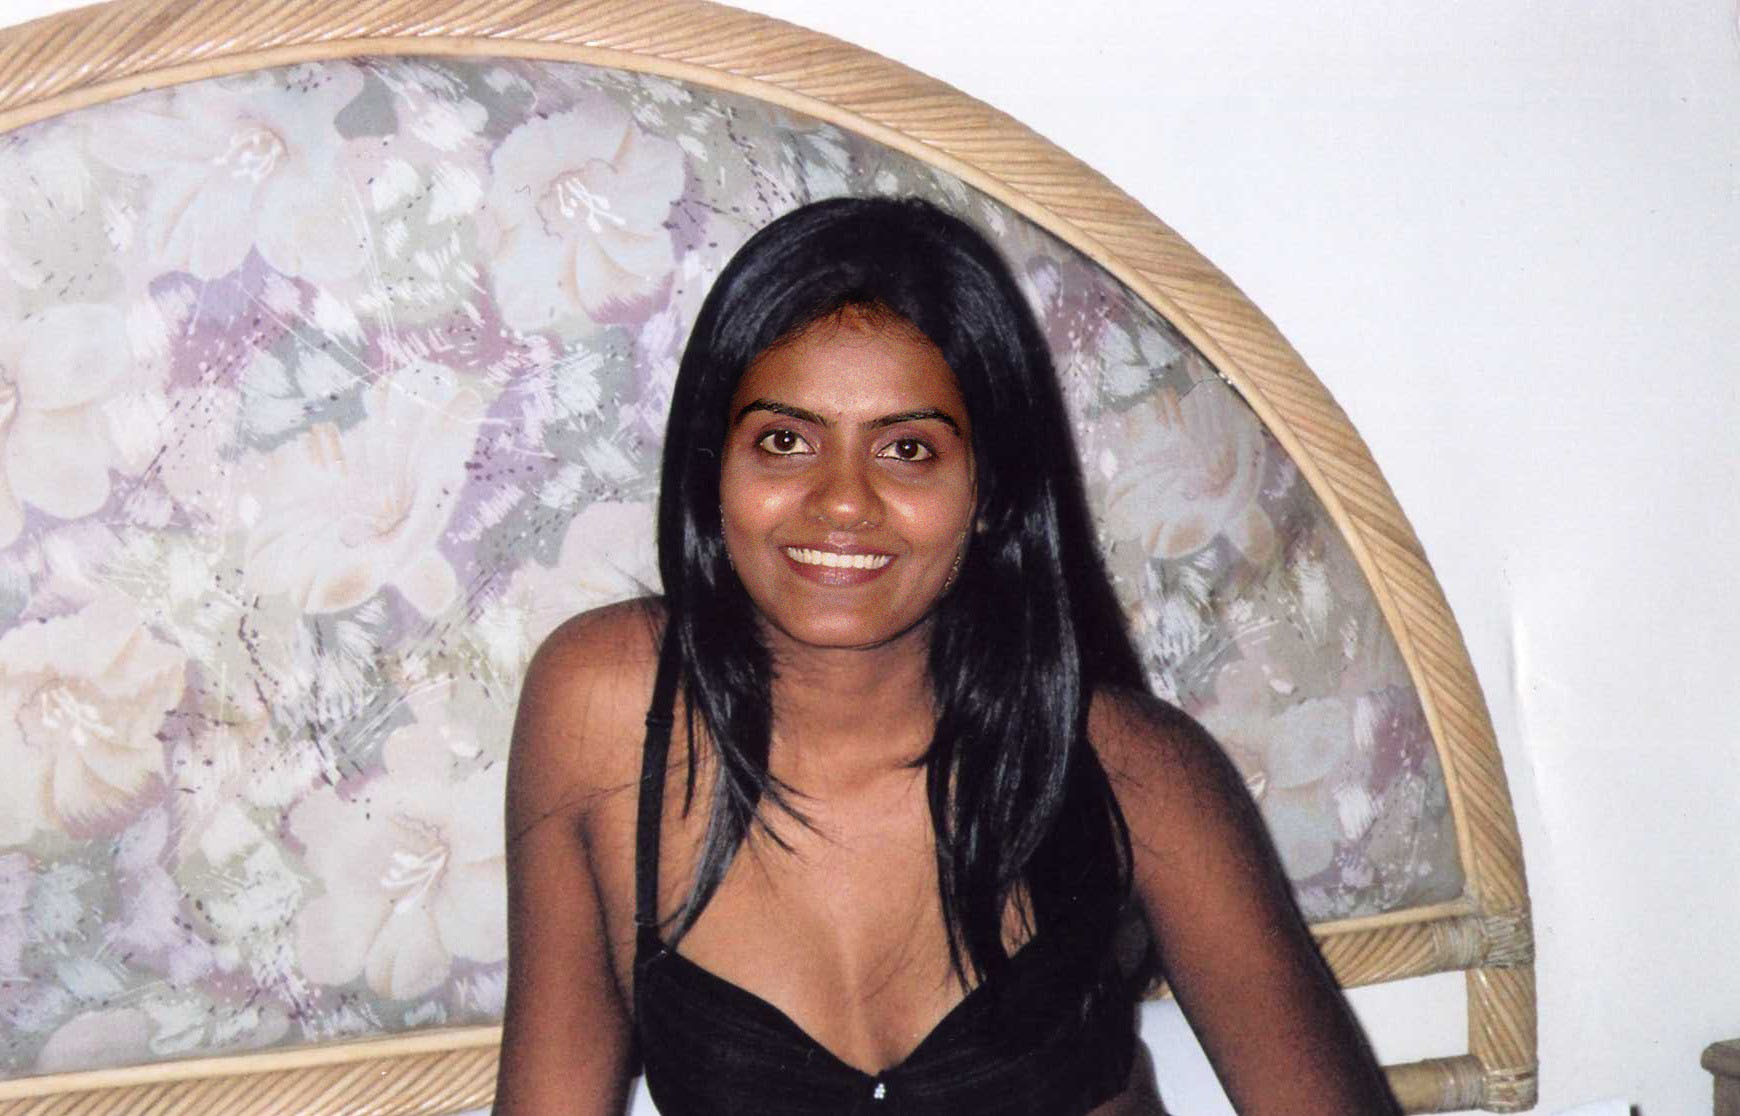 Nude Indian Stockings - stockings Archives - Real Indian Gfs